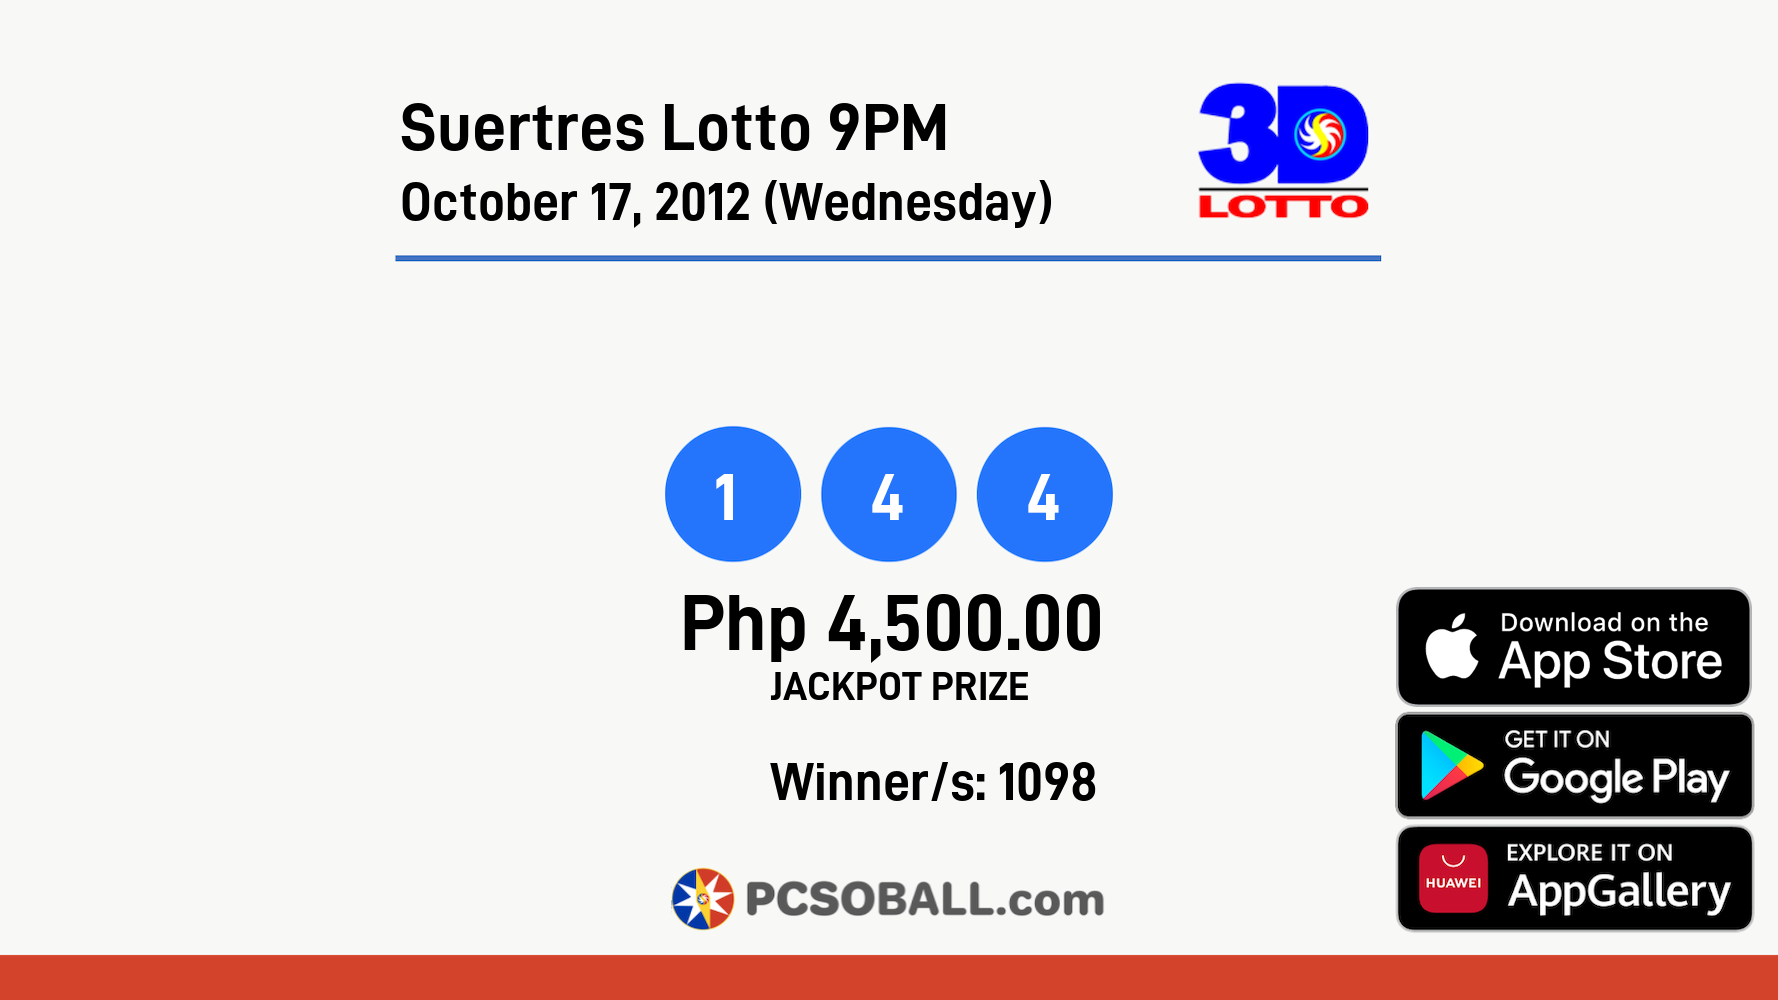 Suertres Lotto 9PM October 17, 2012 (Wednesday) Result